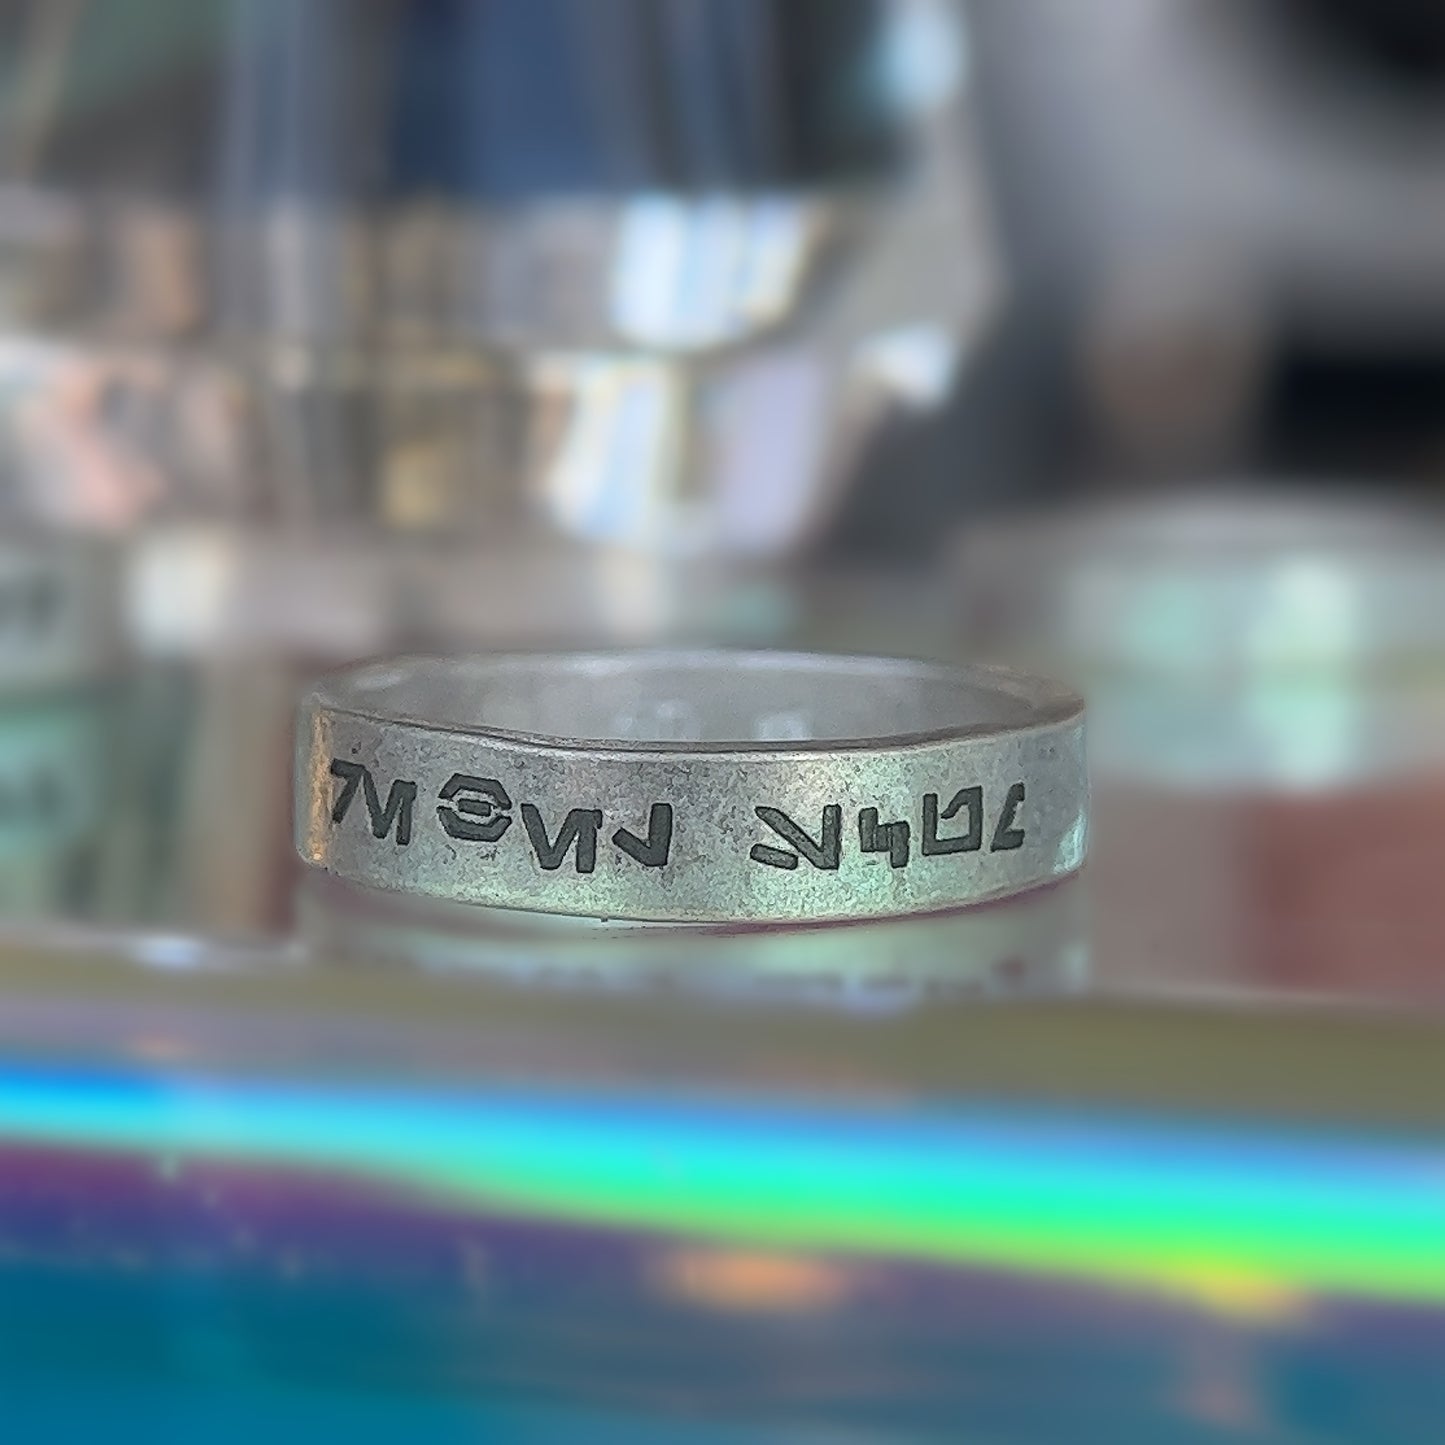 Customize Your Own Aurebesh Ring